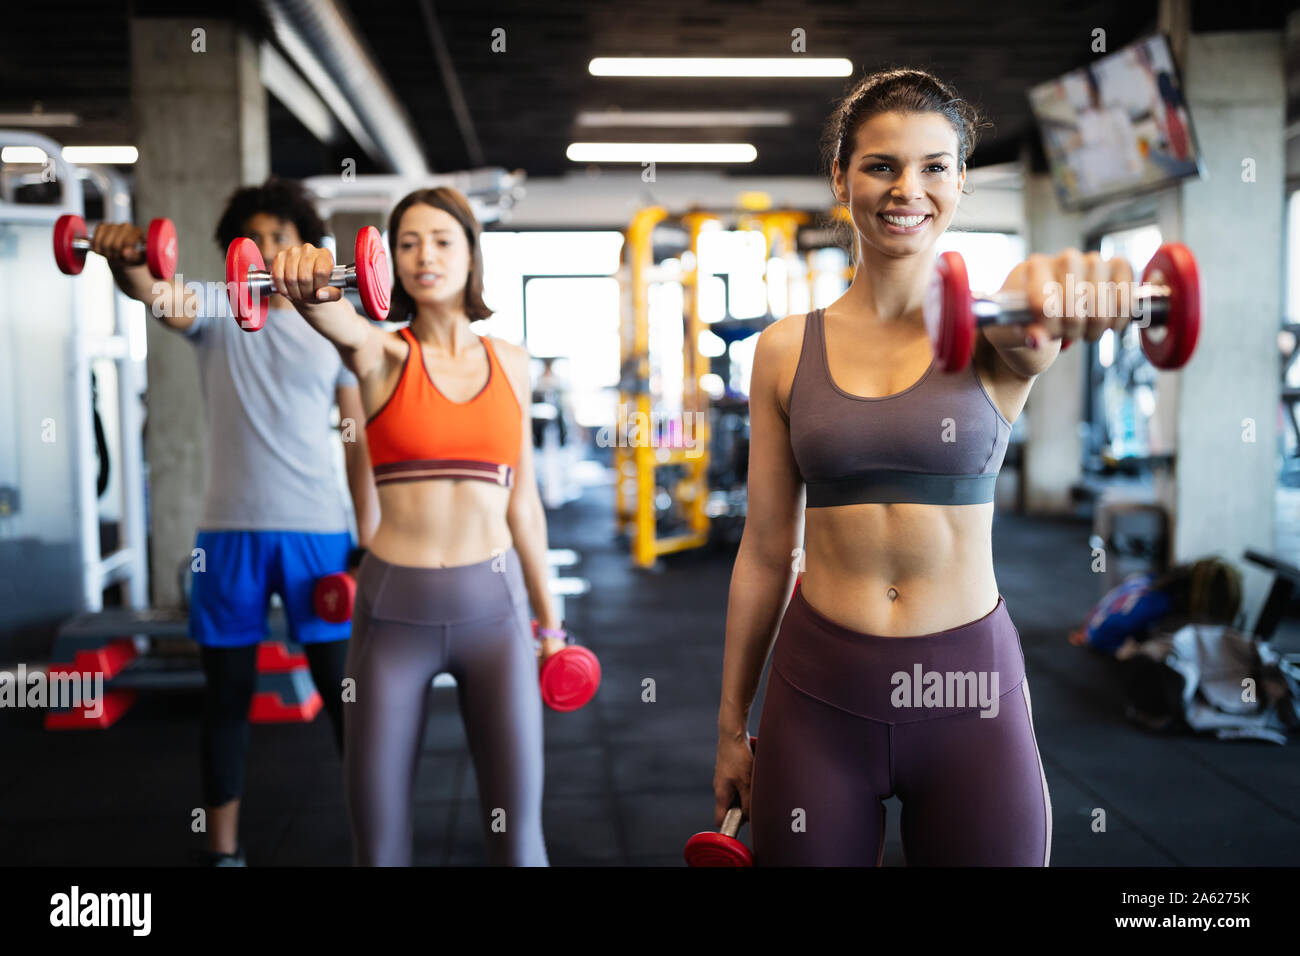 Fitness, sport, training and lifestyle concept. Group of people exercising in gym Stock Photo